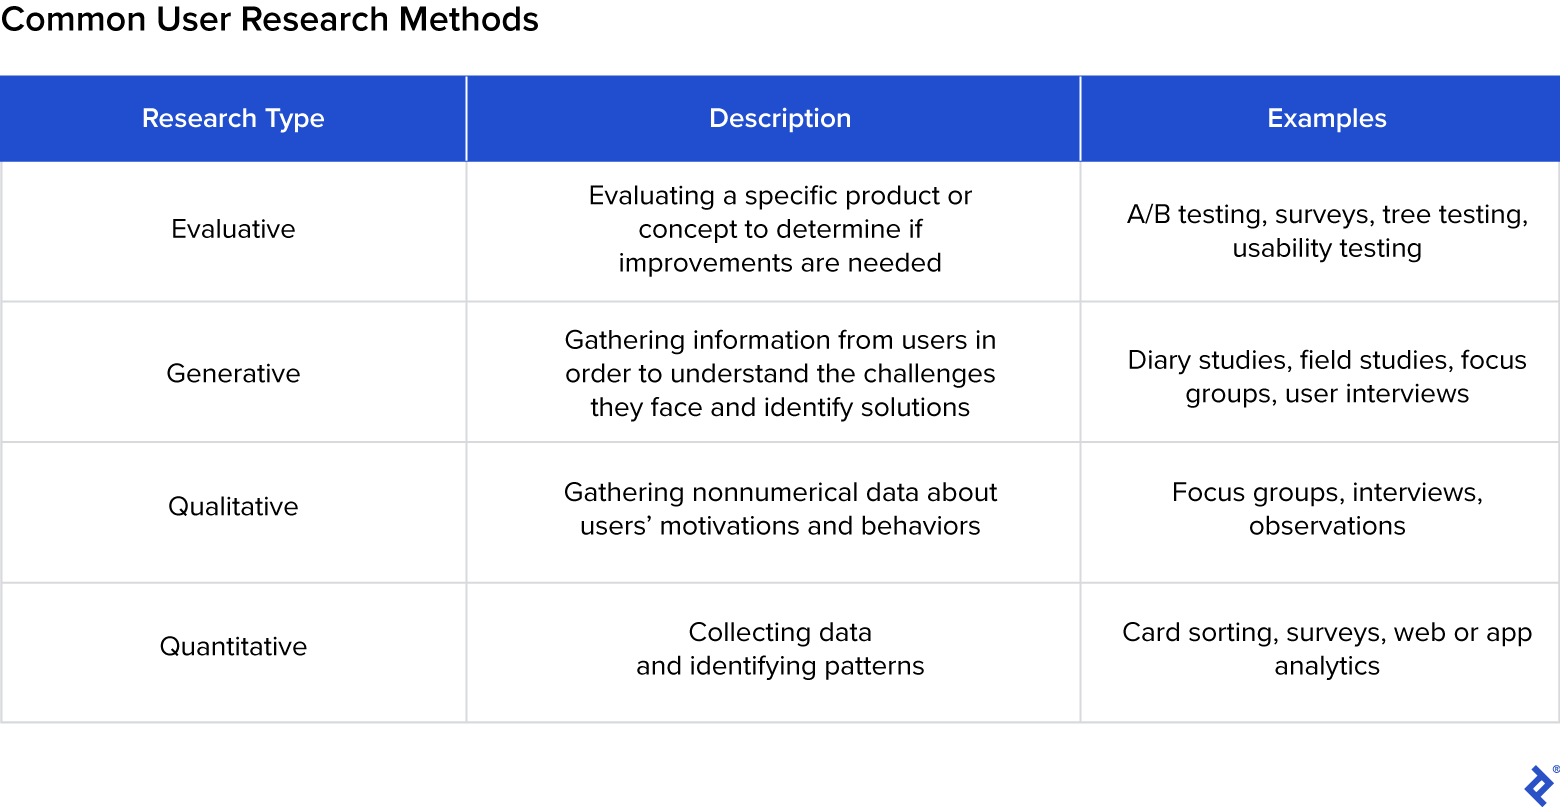 An overview of common user research methods, including evaluative, generative, qualitative, and quantitative methods.